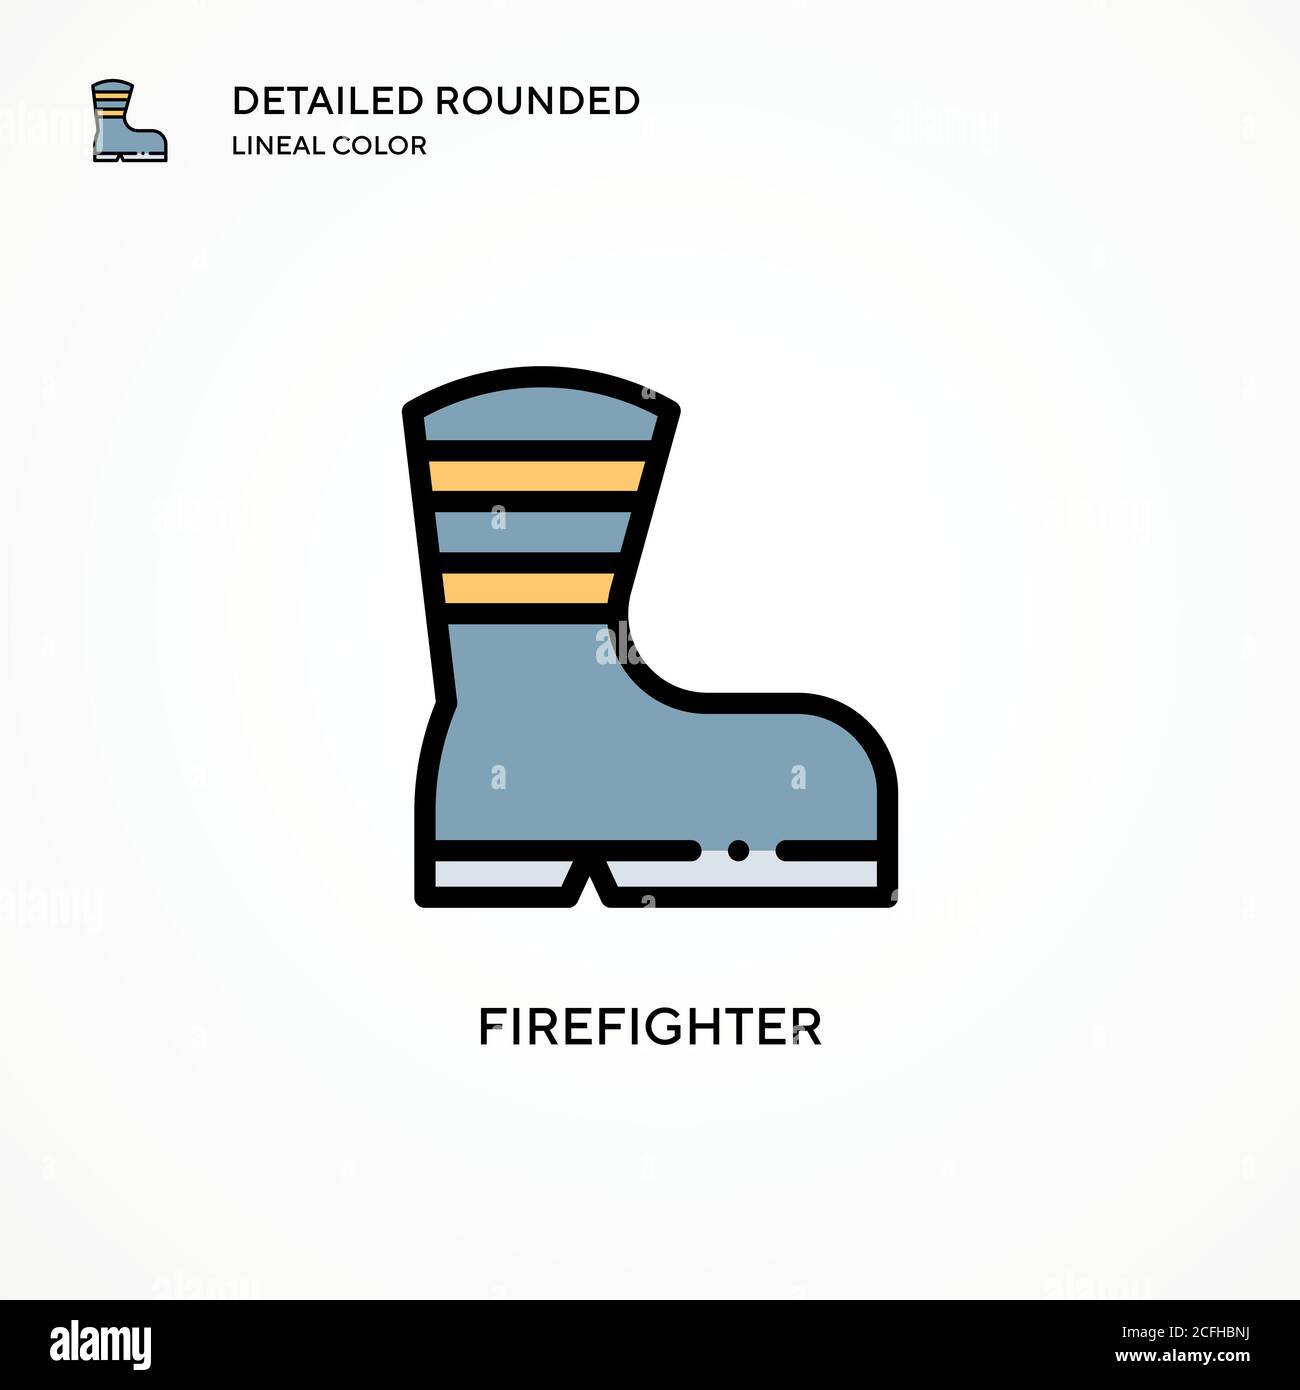 Firefighter vector icon. Modern vector illustration concepts. Easy to edit and customize. Stock Vector